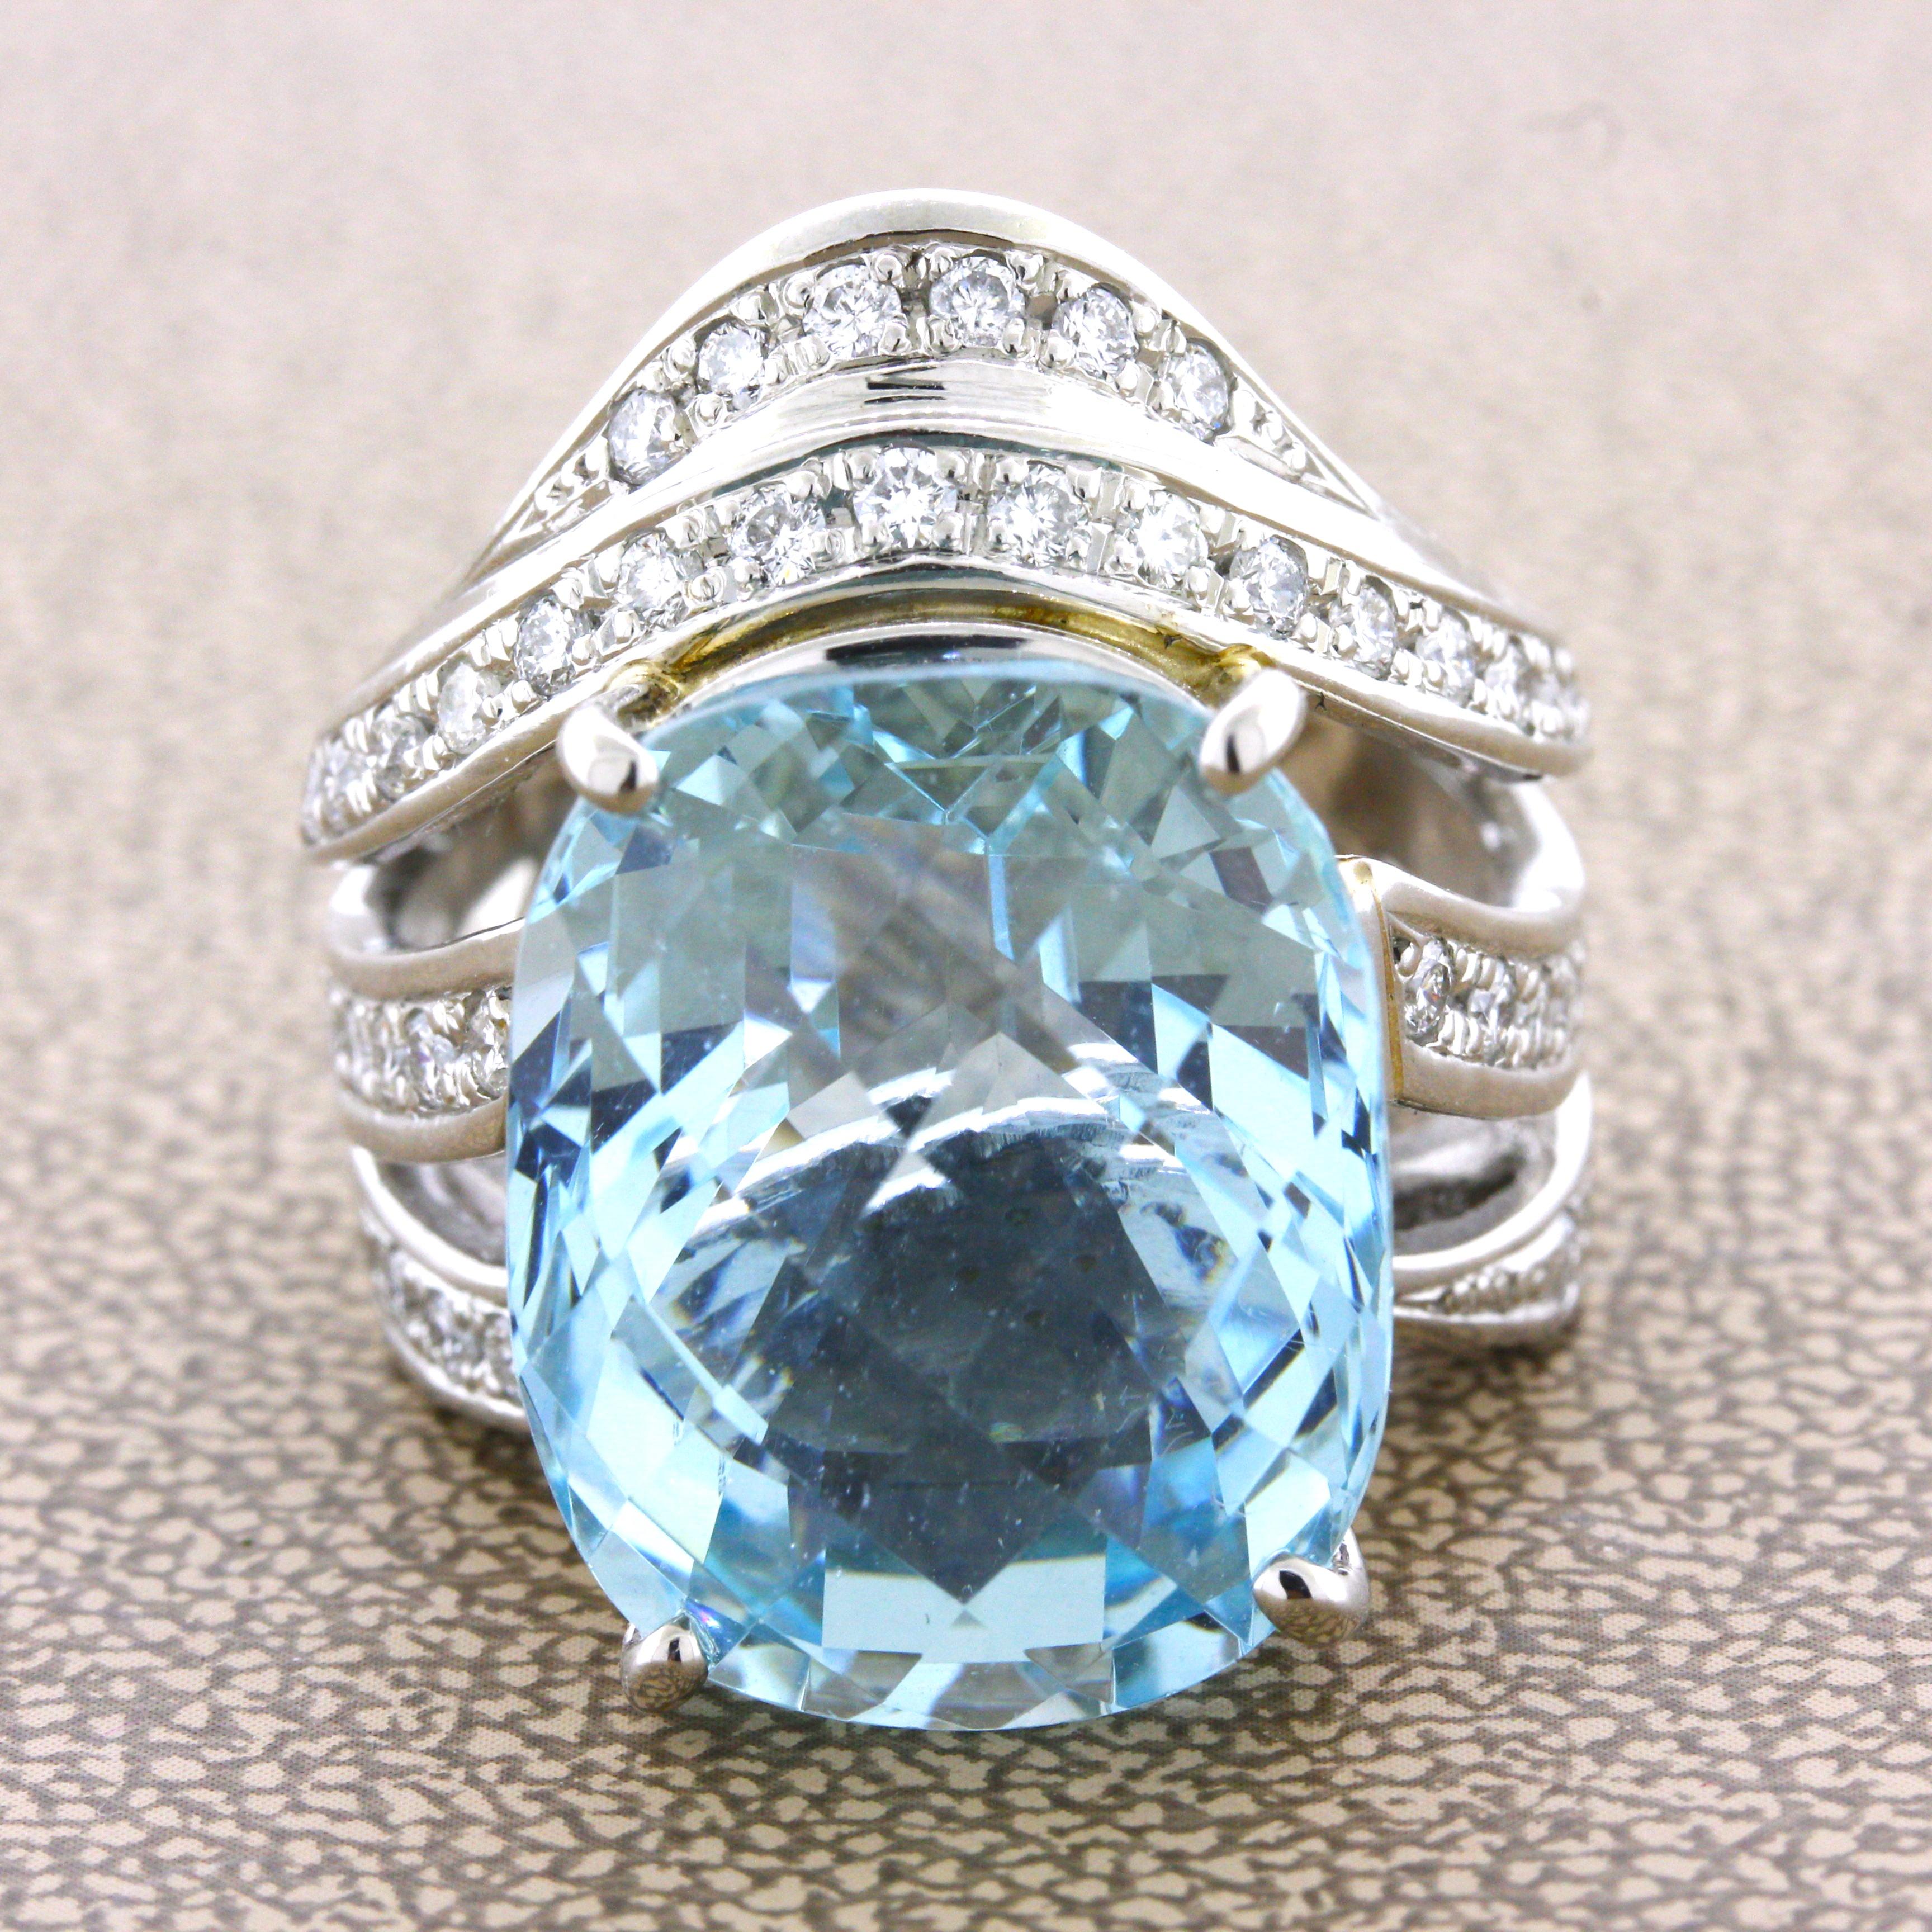 A large and impressive ring featuring a 20.10 carat aquamarine! It has the classic bright sea-blue color that the aquamarine is known for and has a unique rose-cut on its table. It is complemented by 1.00 carat of round brilliant-cut diamonds set in